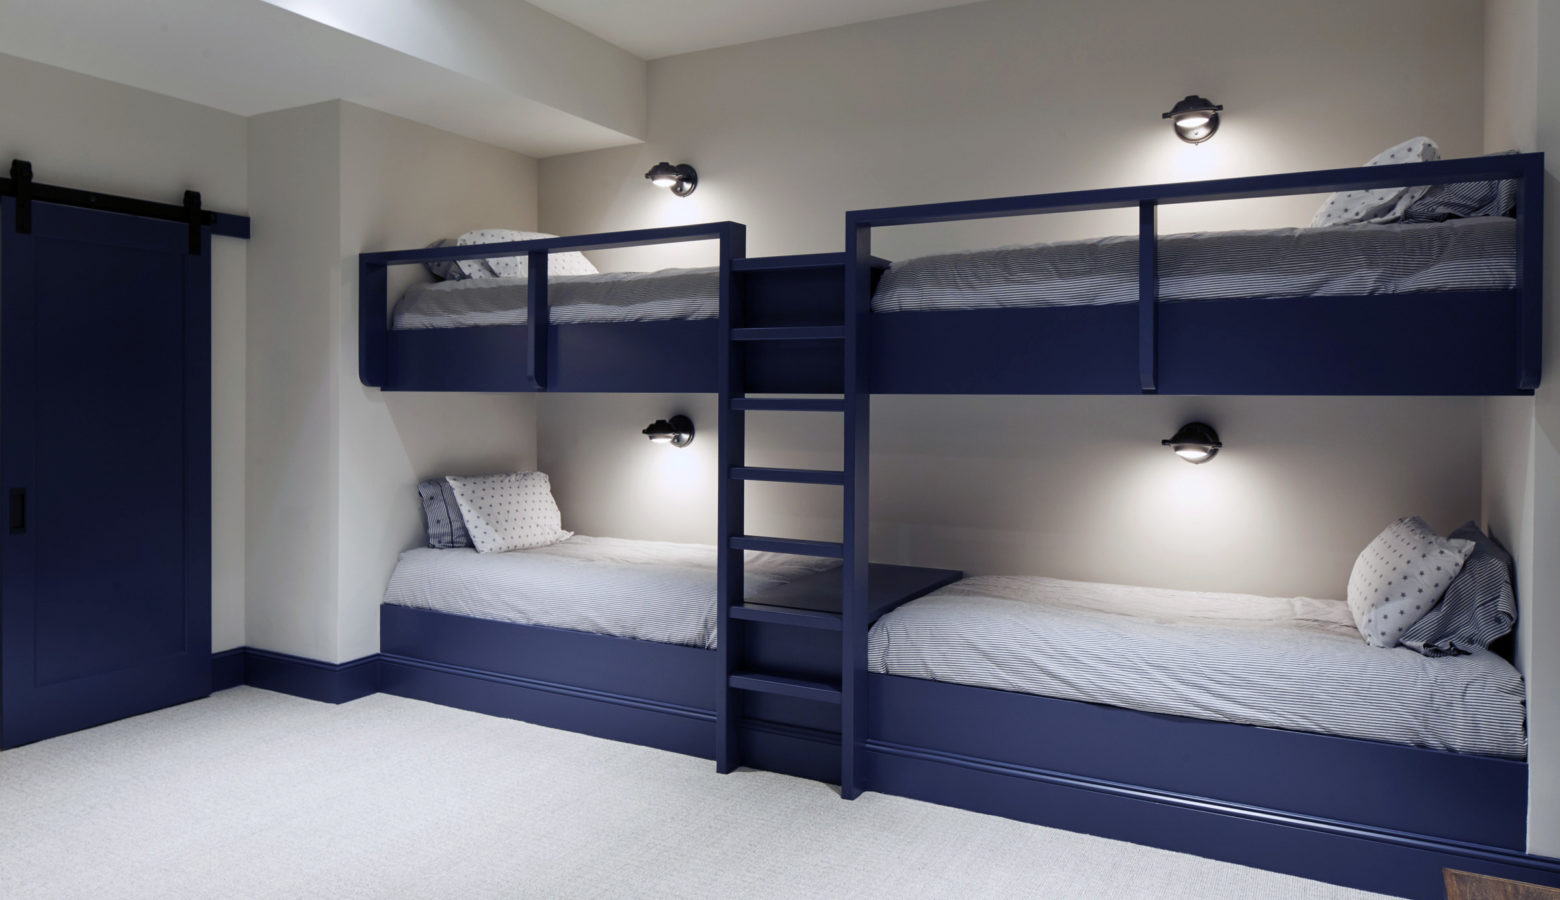 The Benefits of Building a Bunk Room (Thirty Years, Thirty Ideas Series)